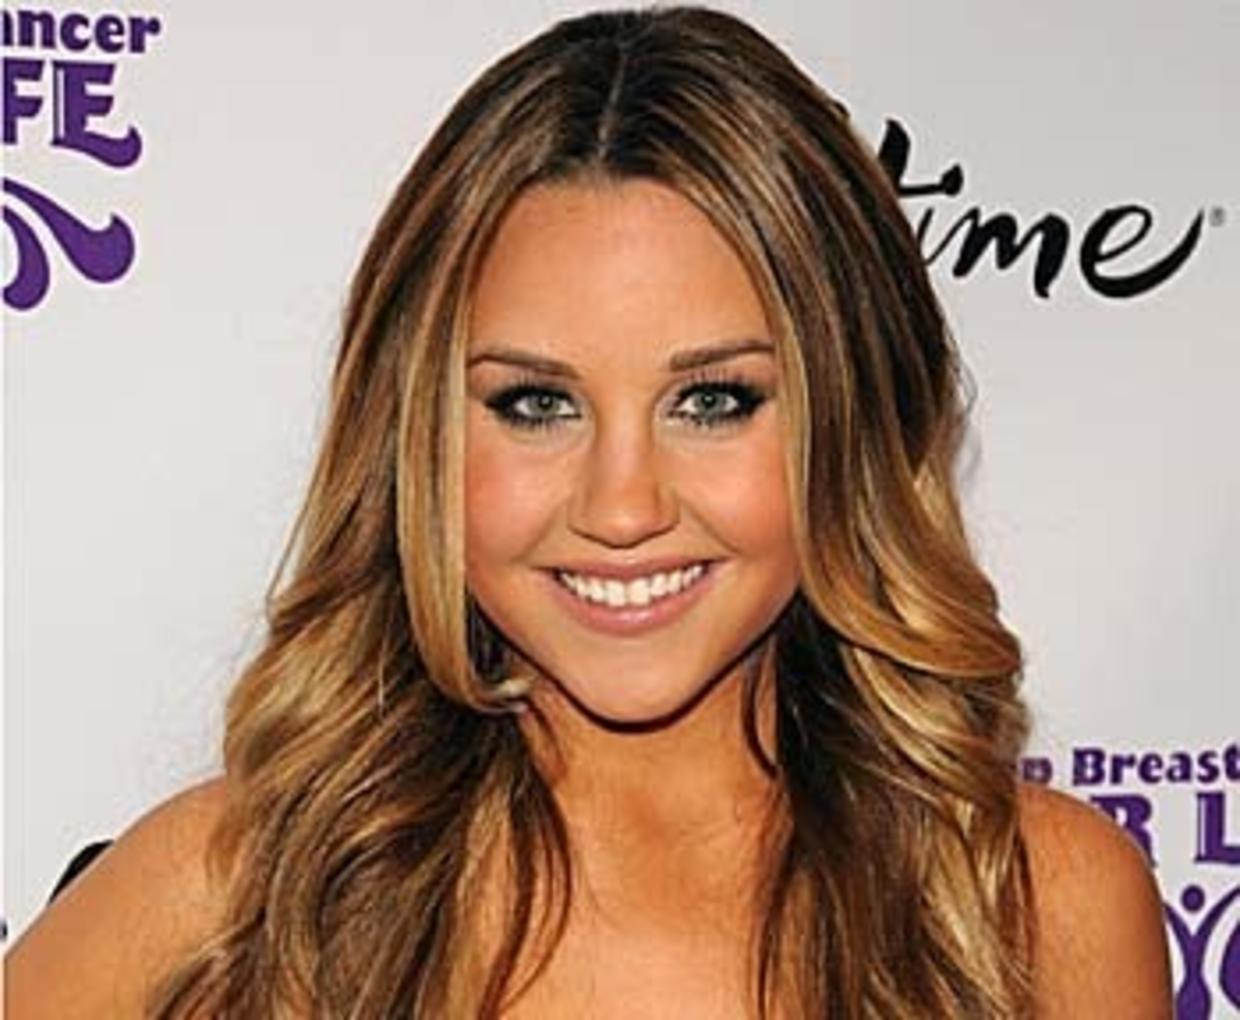 Amanda Bynes Retires From Acting Posts Note On Twitter Cbs News 5933